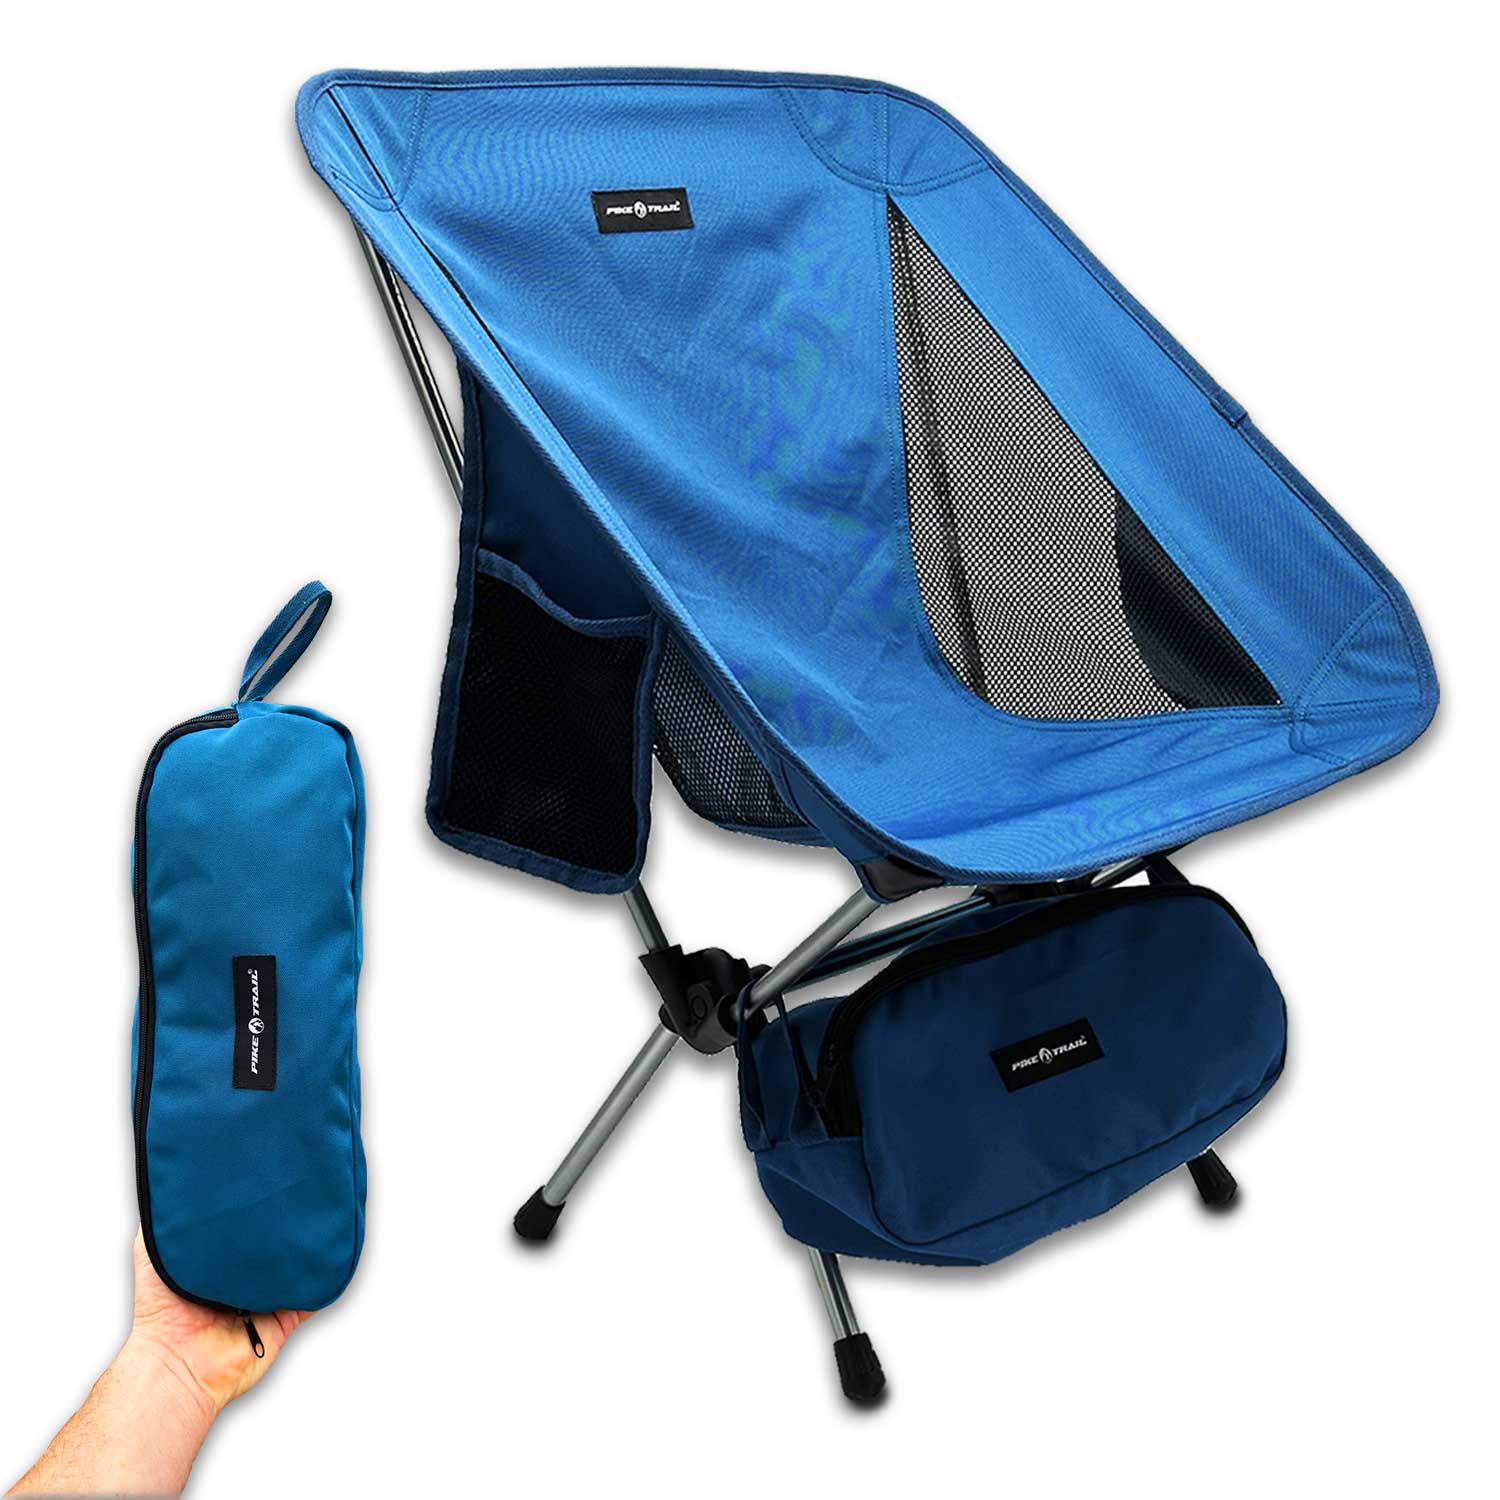 Lightweight Compact Folding Camping Backpack Chairs, Portable, Breathablem  Comfortable, Perfect for The Outdoors, Camping, Hiking, Picnic 